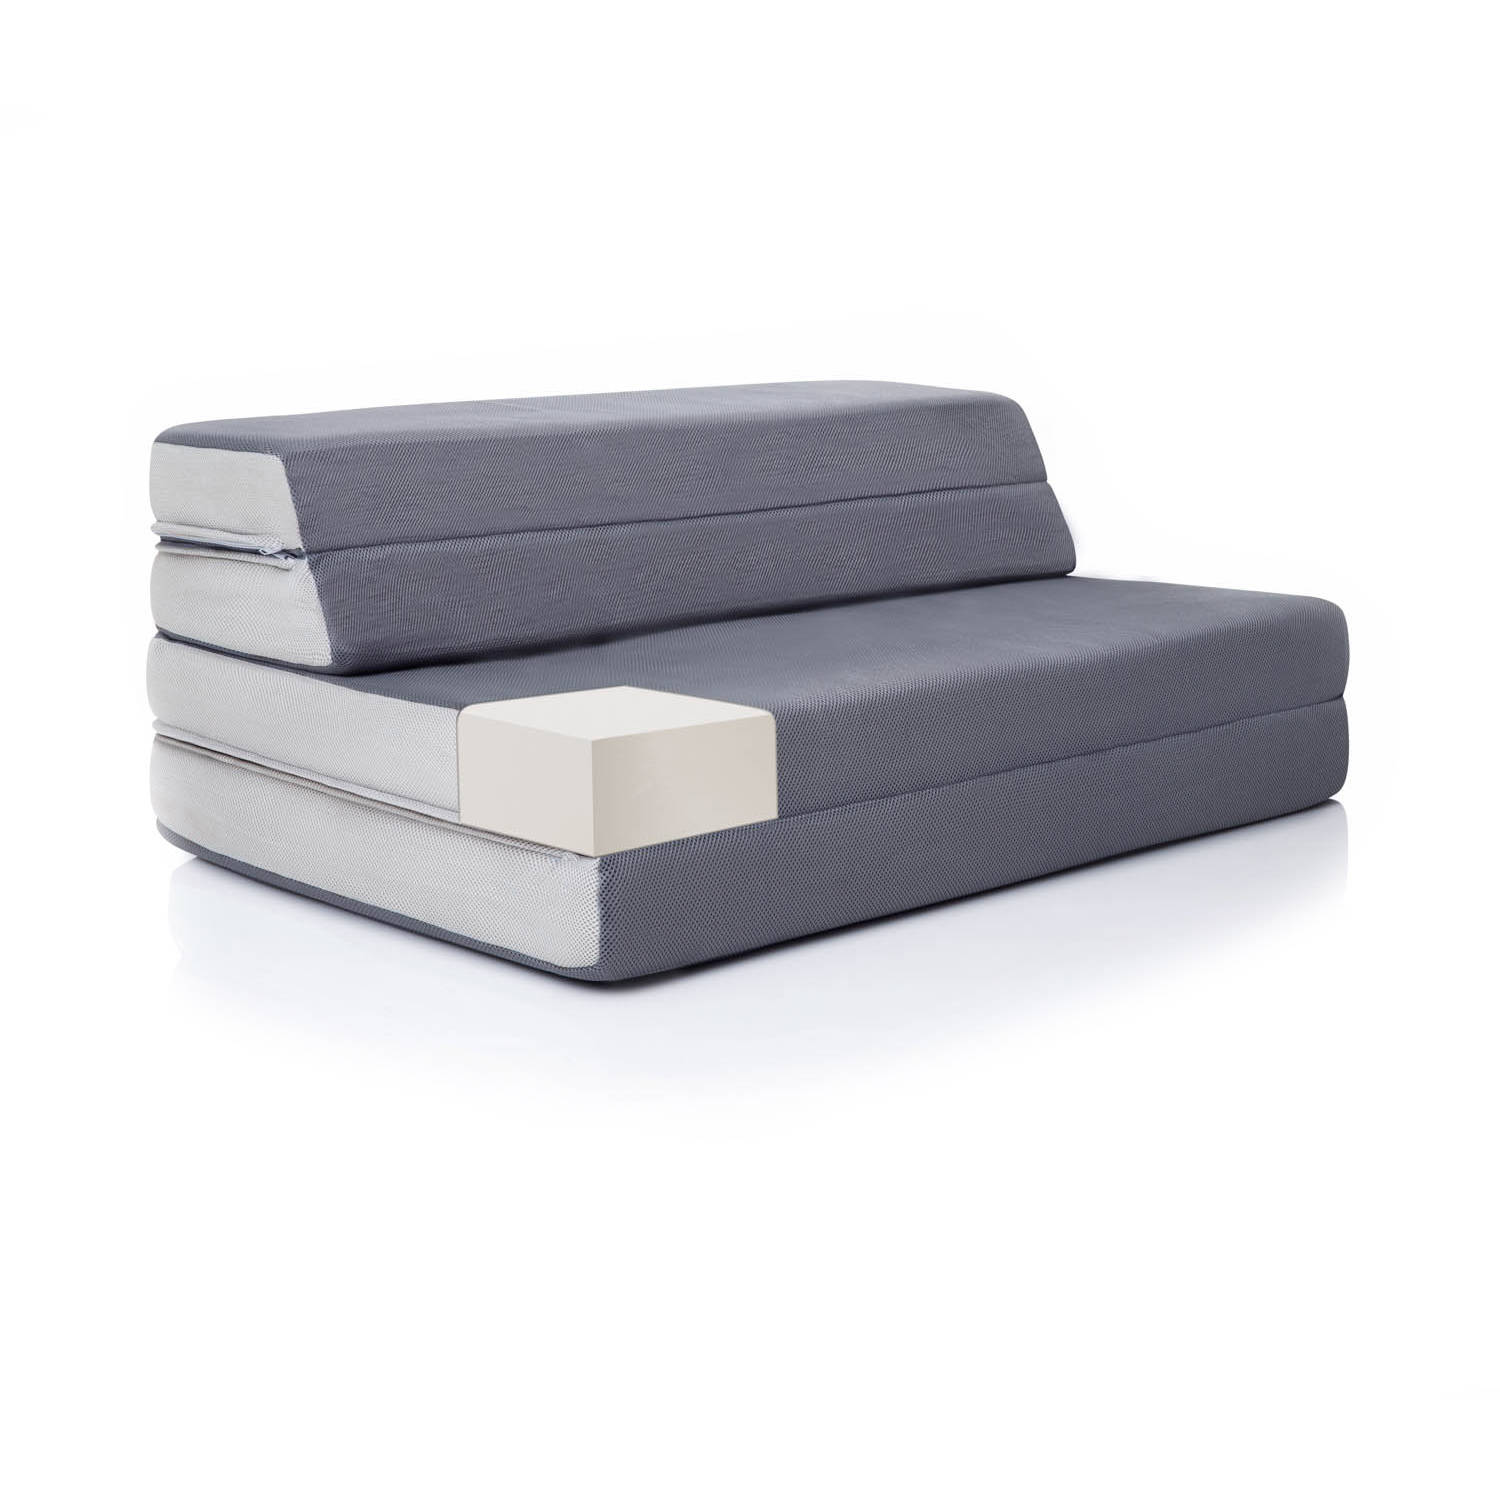 Lucid 4 inch folding mattress and sofa armchair, several sizes CBVHLTY